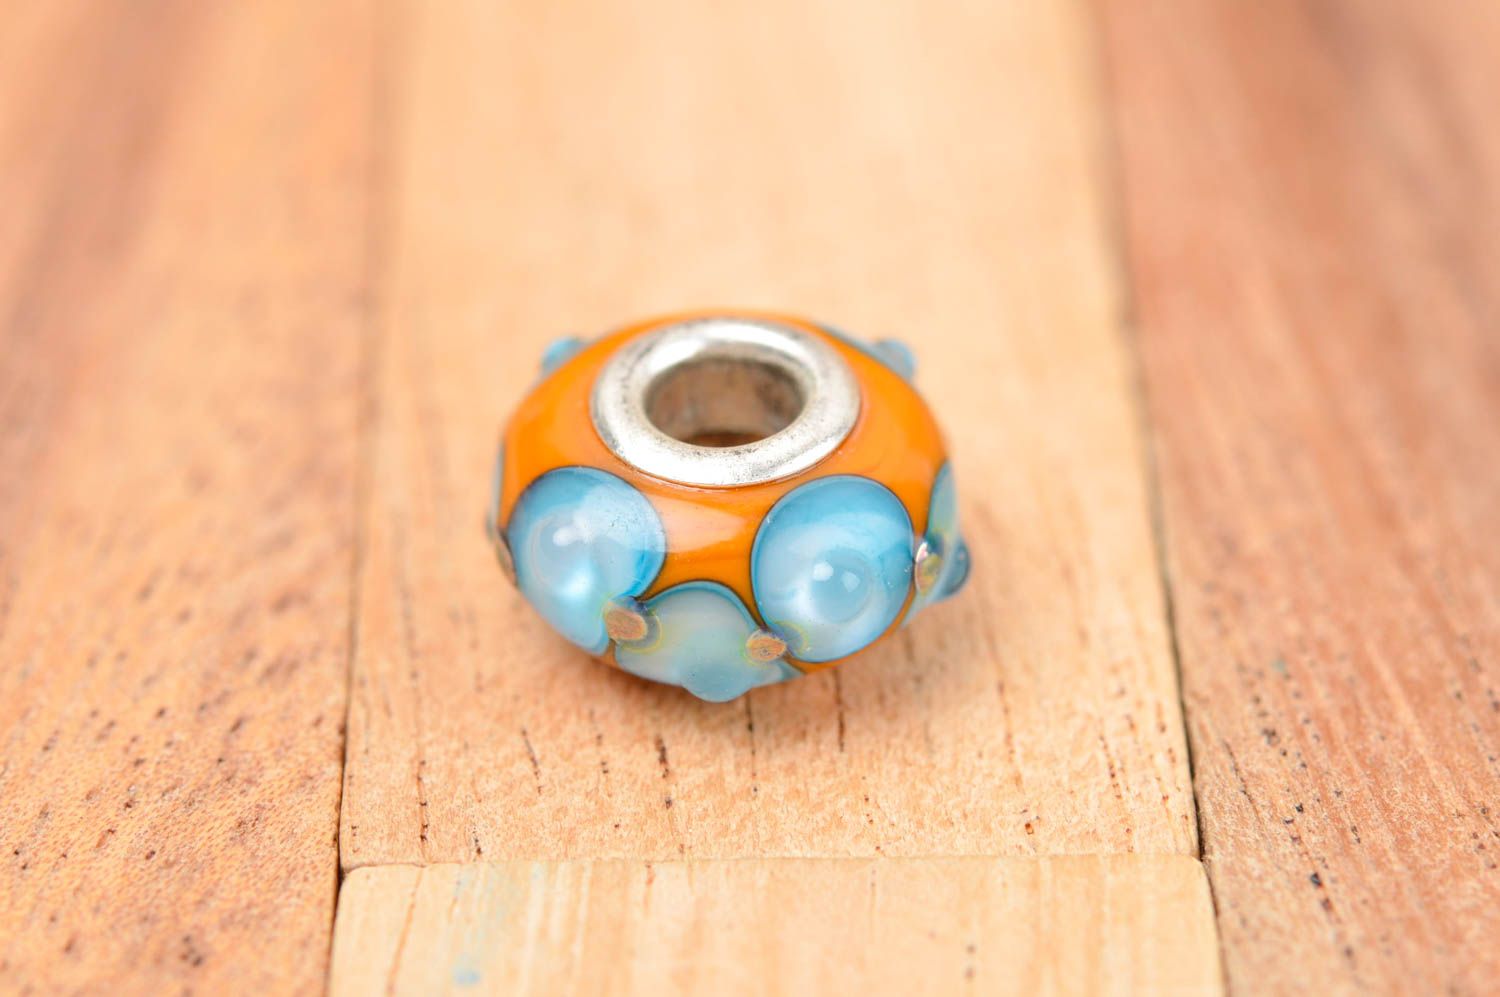 Beads fittings unusual beads designer accessory fittings for jewelry gift ideas photo 2